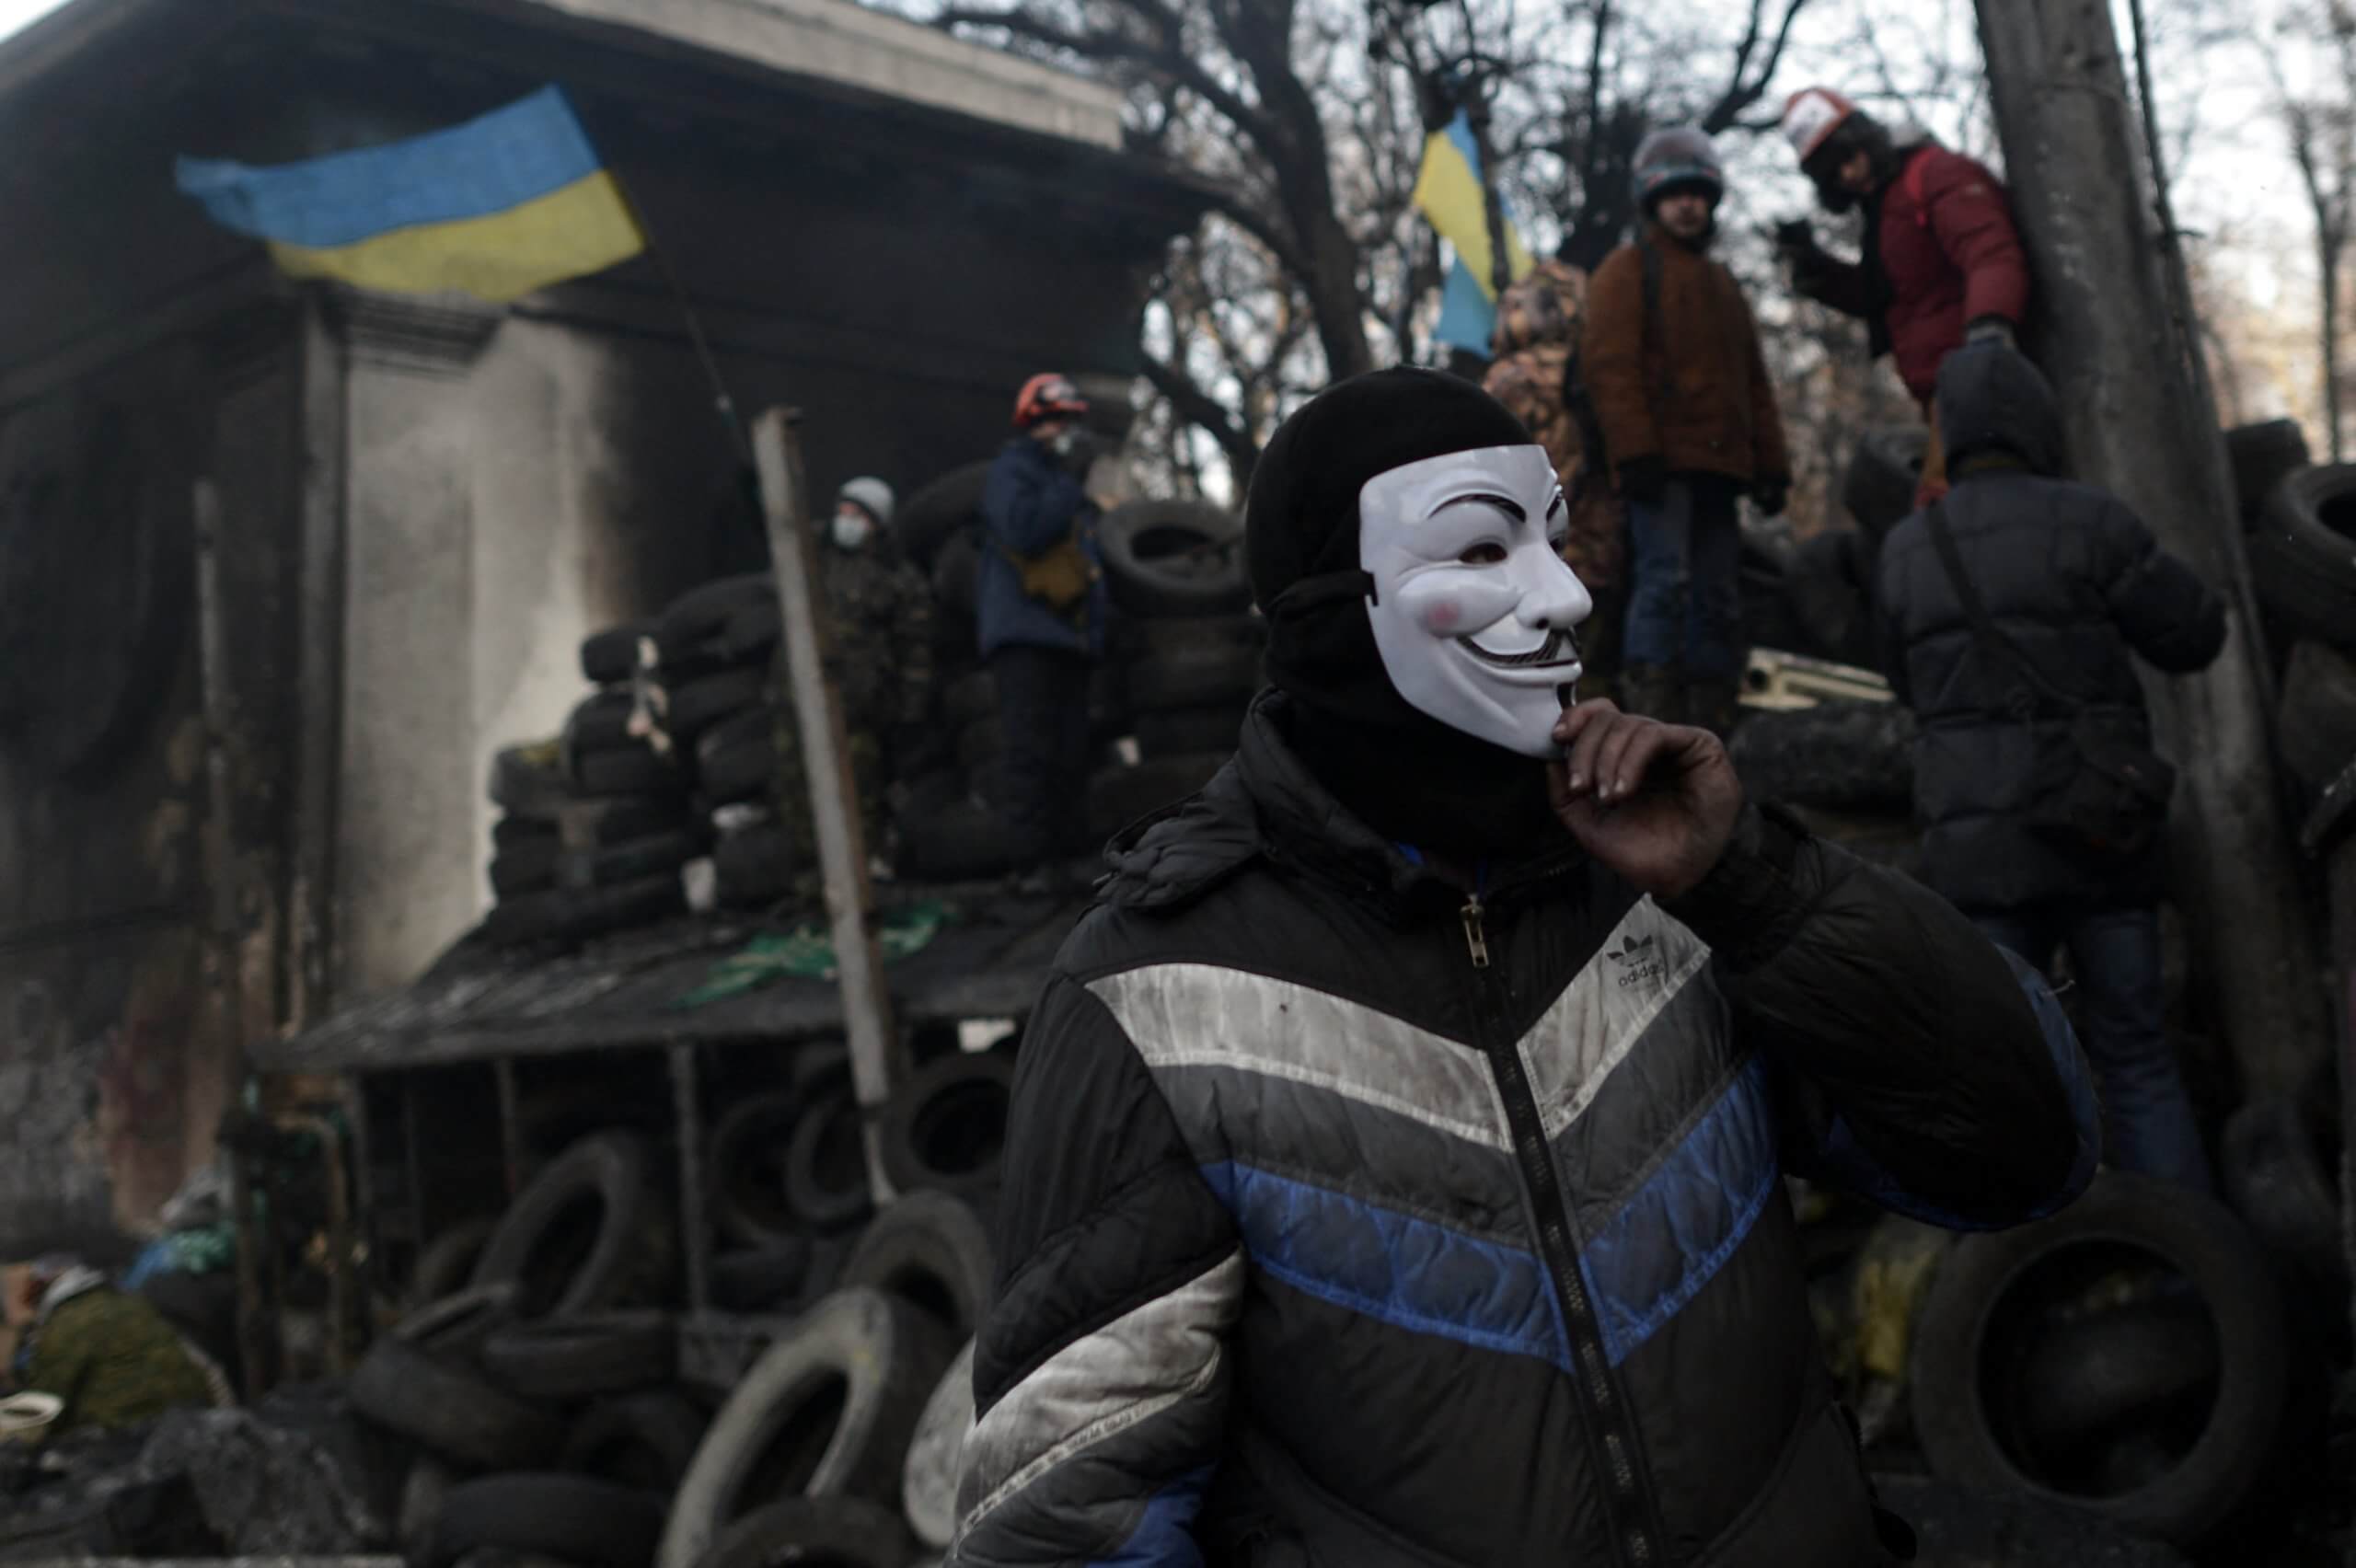 Tech companies and hacker groups are picking sides in the Russia-Ukraine crisis